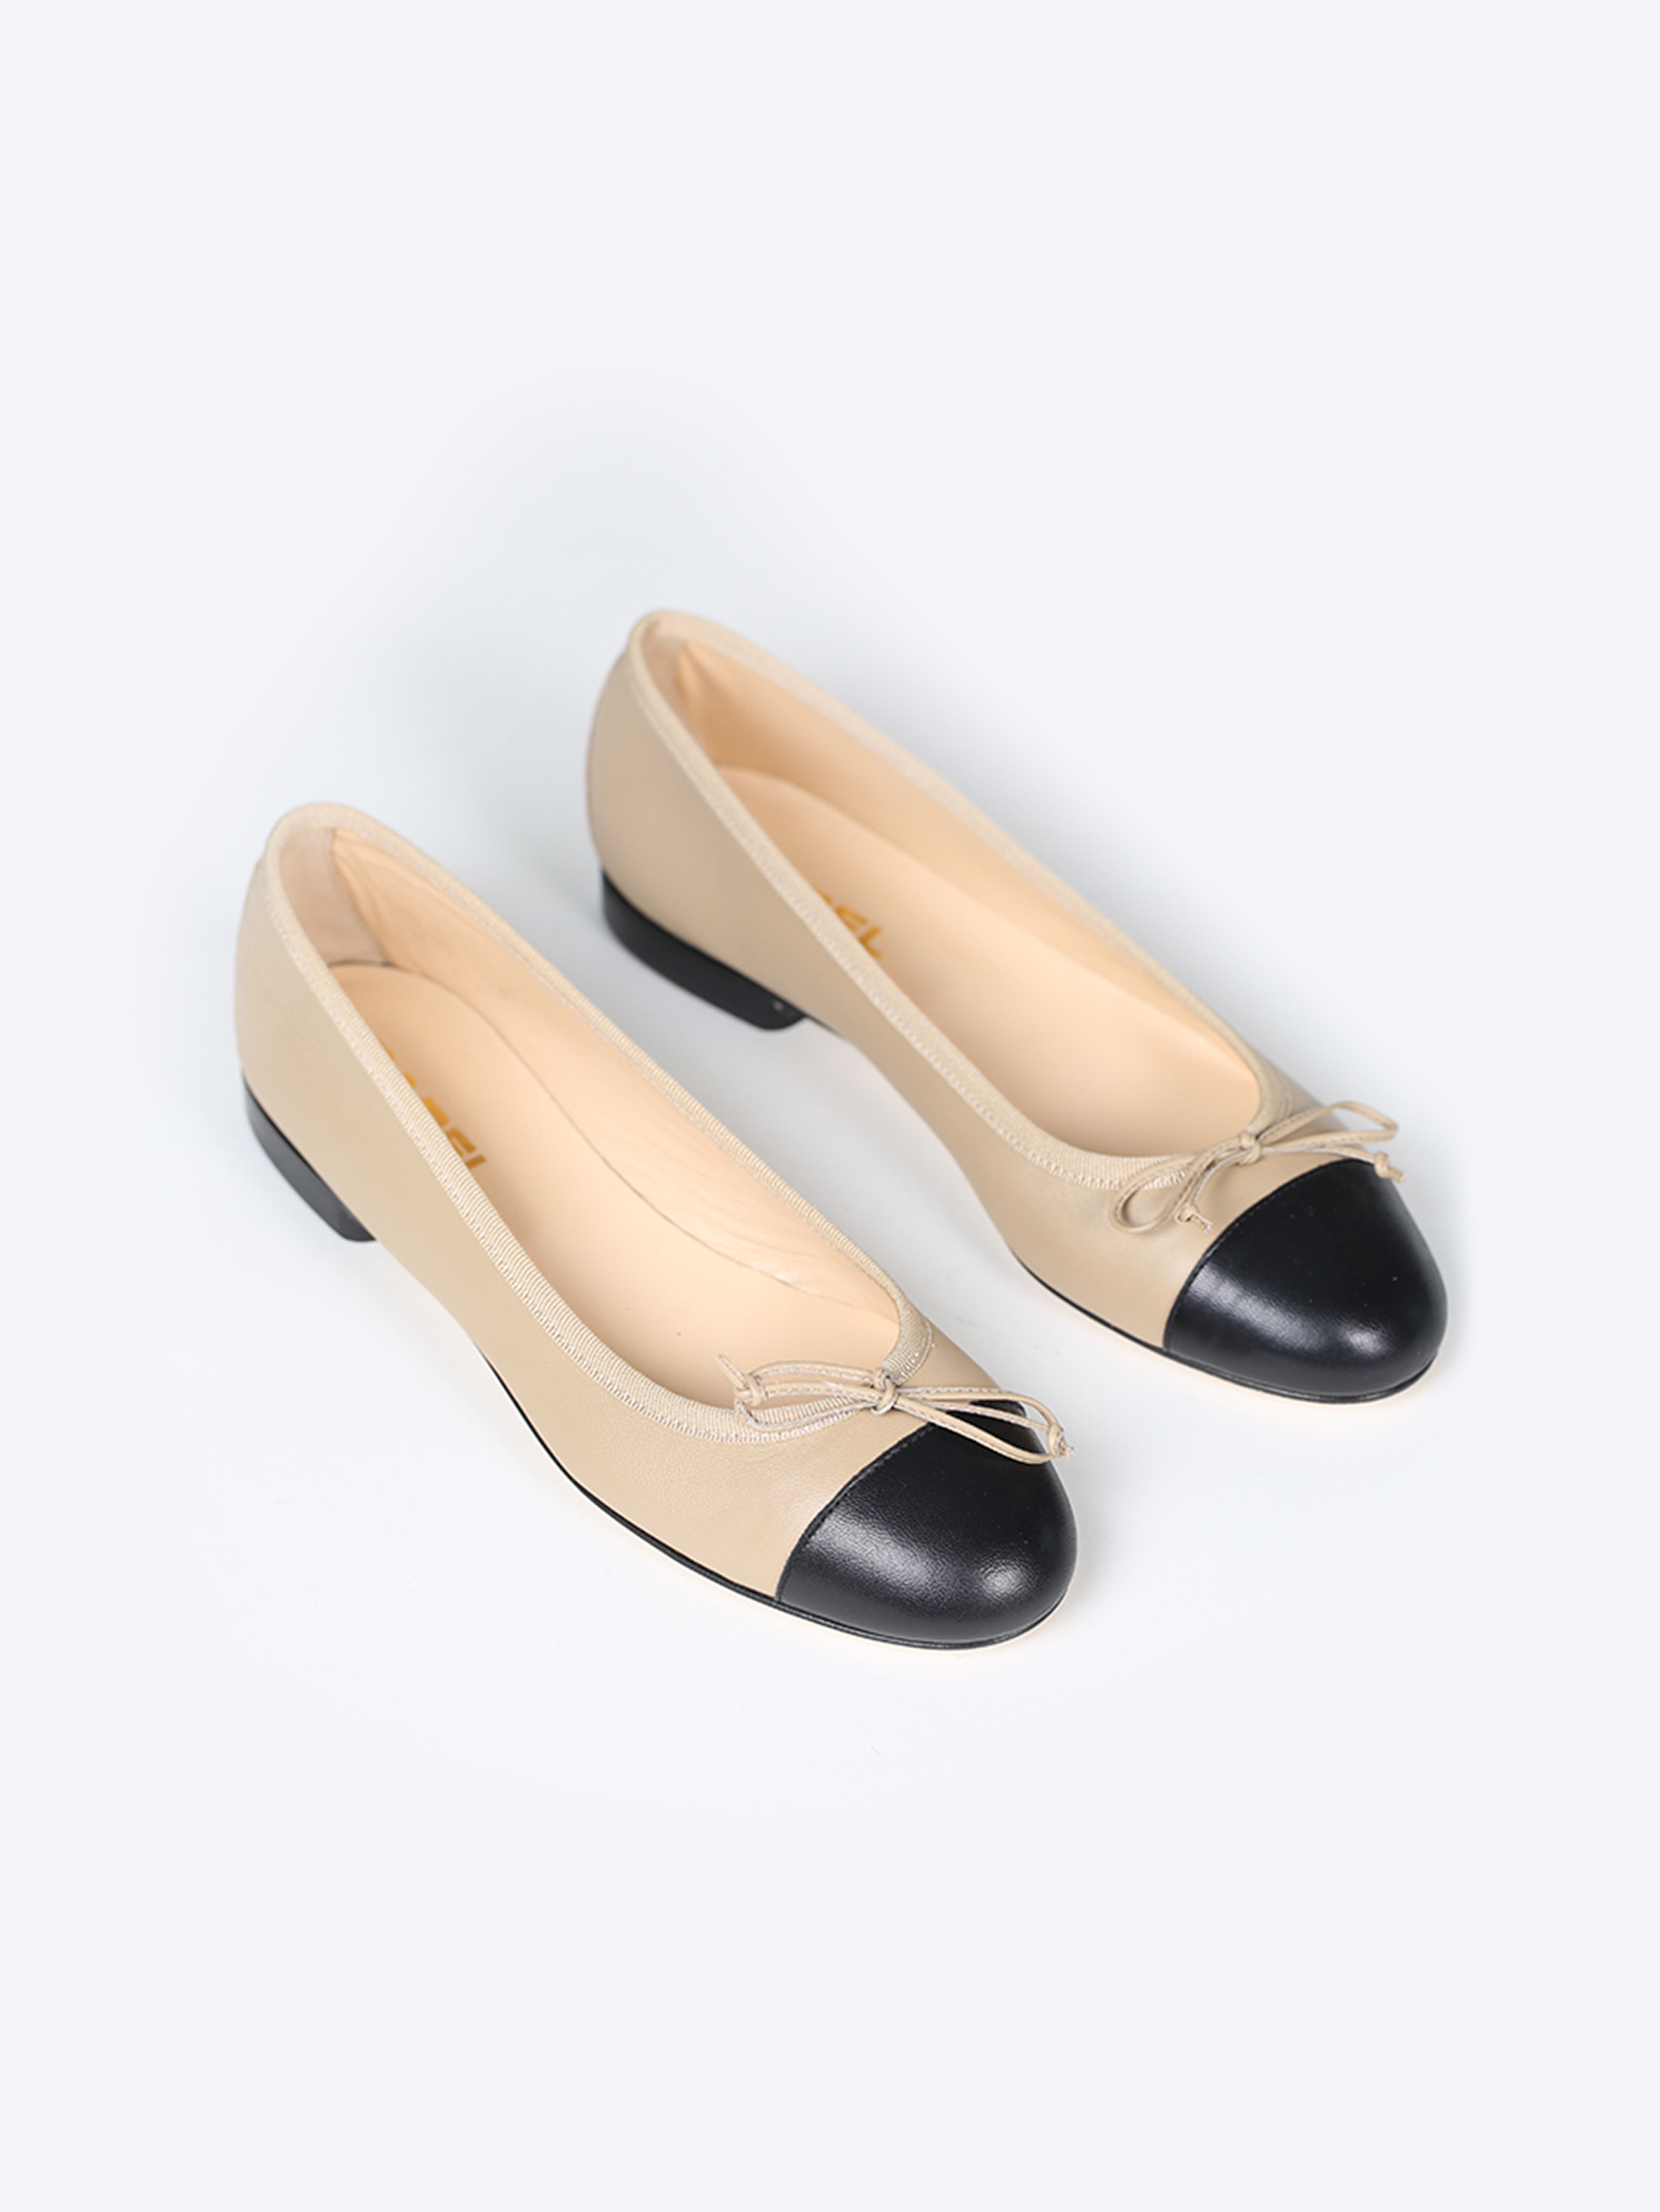 Black and beige leather ballet flats